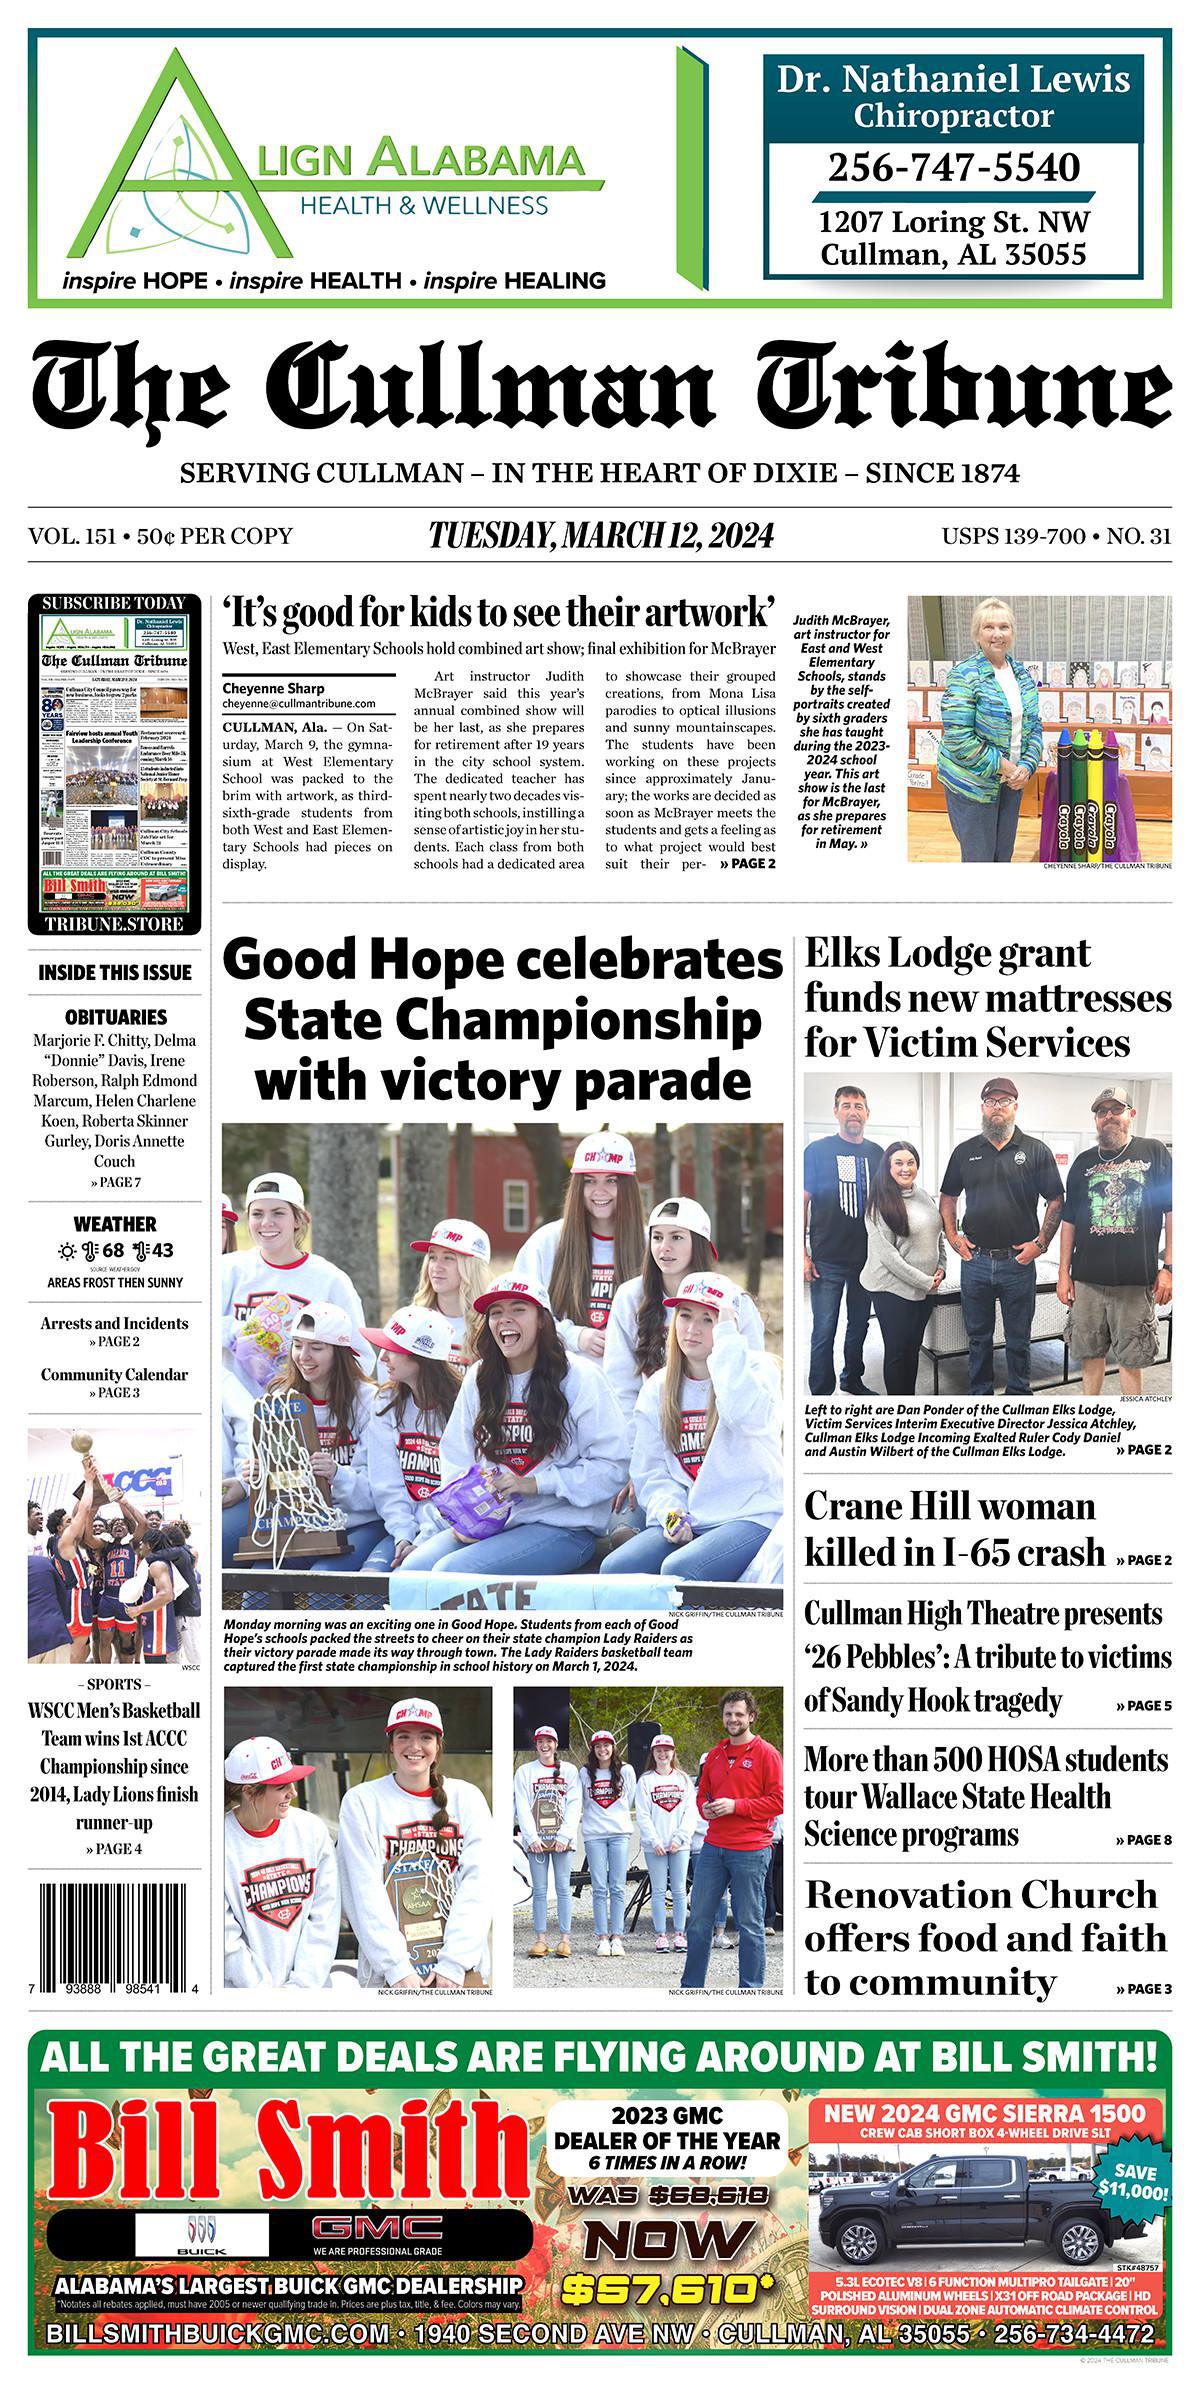 Good Morning Cullman! The 03-12-2024 edition of the Cullman Tribune is now ready to view.